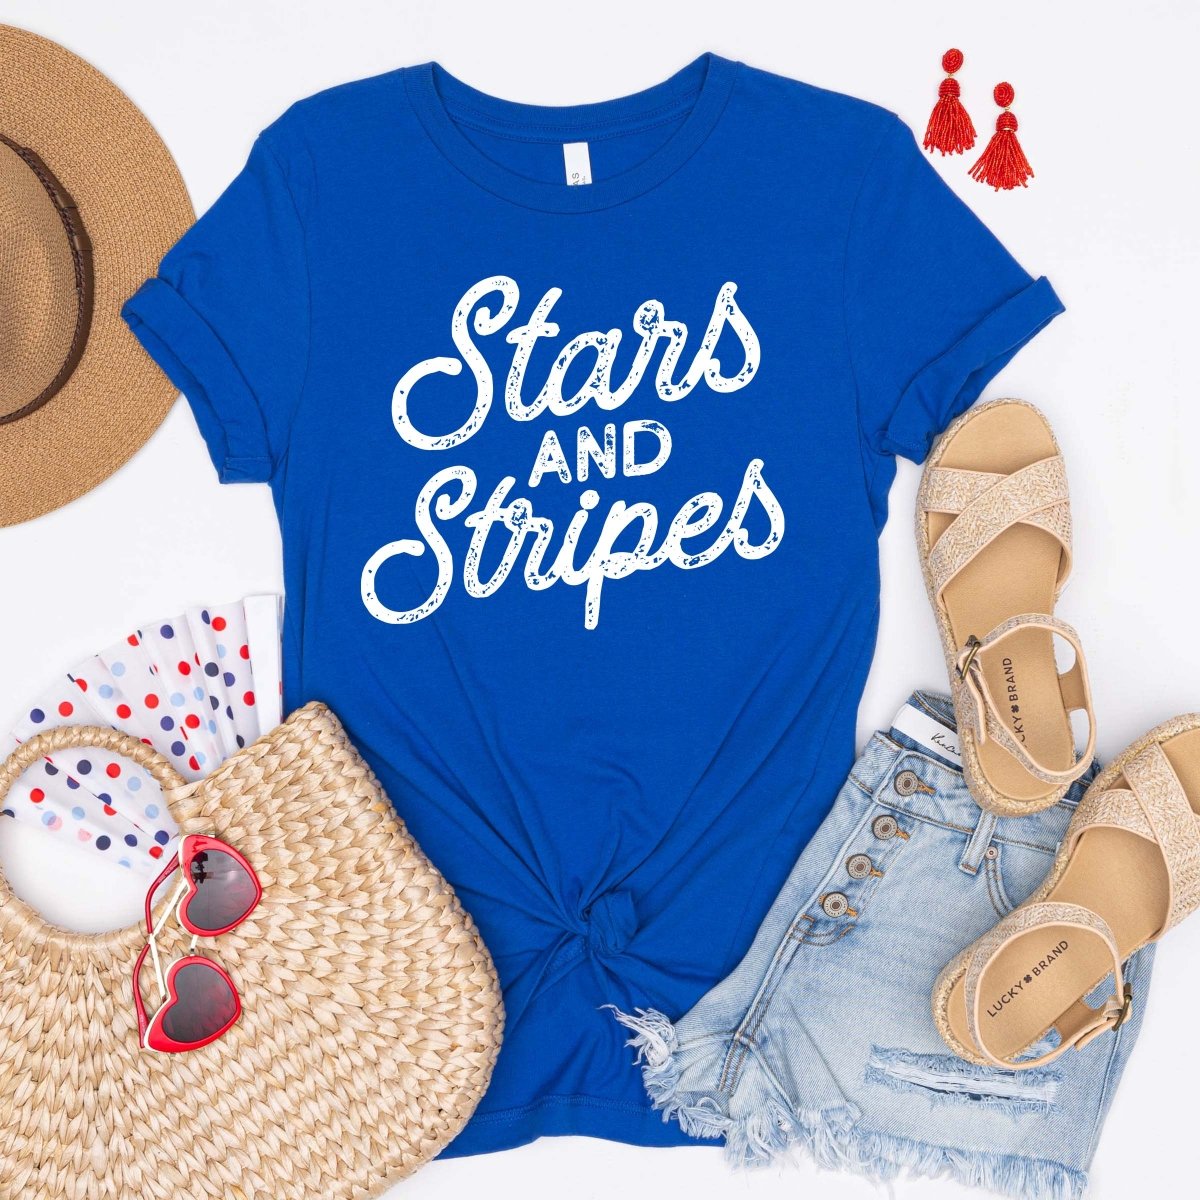 Lucky Brand Red, White, and Blue V-neck Stars and Stripes T-shirt